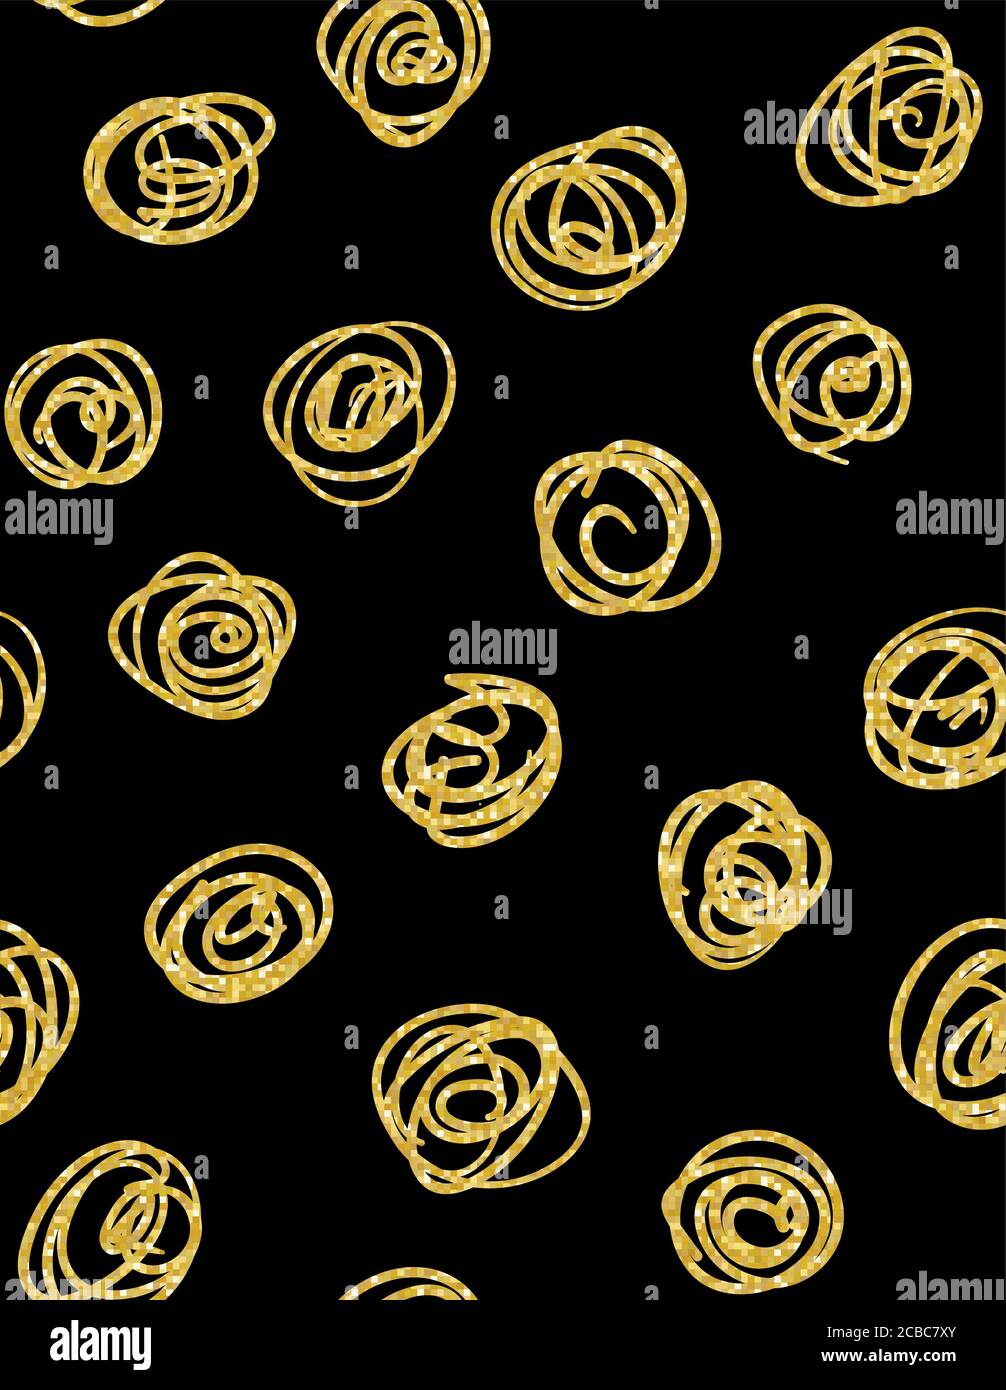 Vector pattern with circles. Black and gold colors. Stock Vector